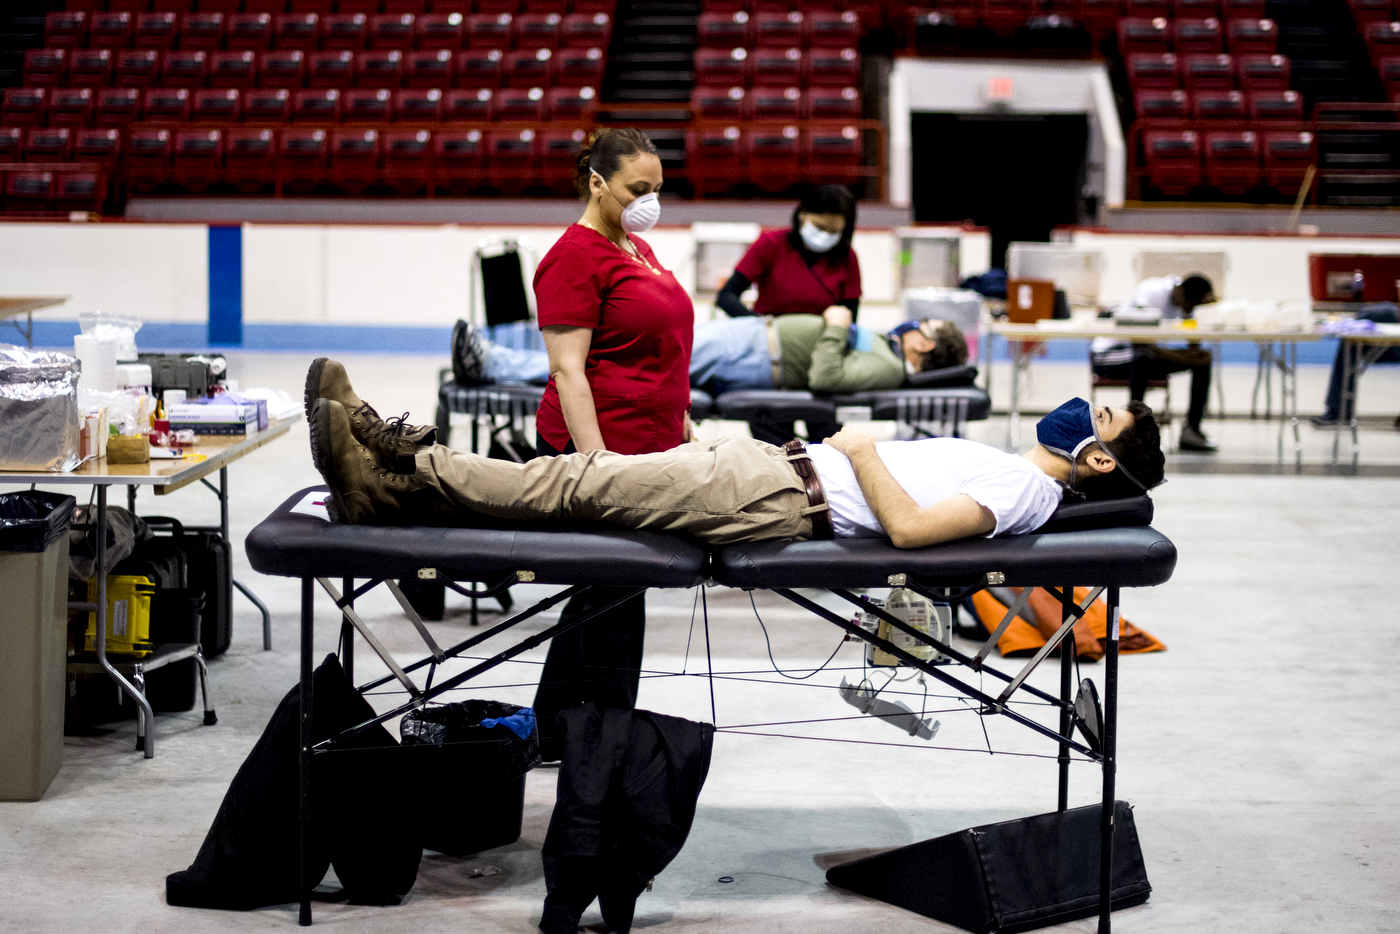 COVID-19 has shut down many blood drives. Northeastern came to rescue this one.